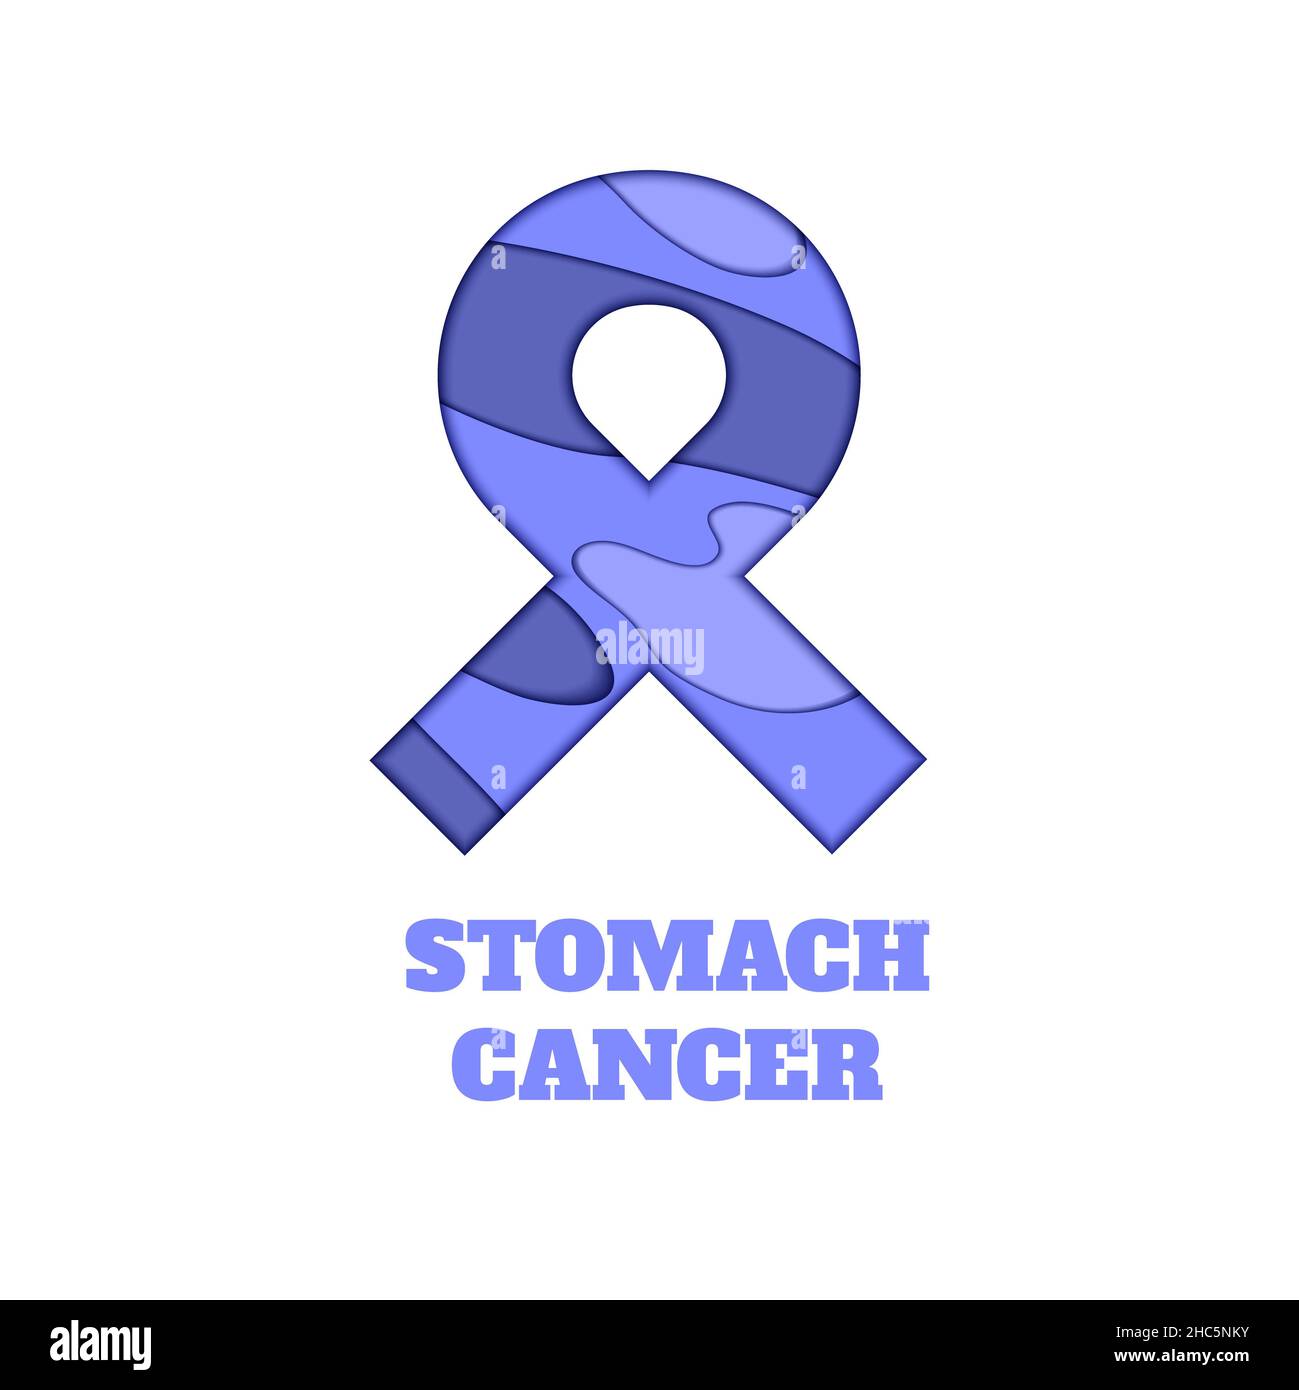 Stomach cancer, conceptual illustration Stock Photo